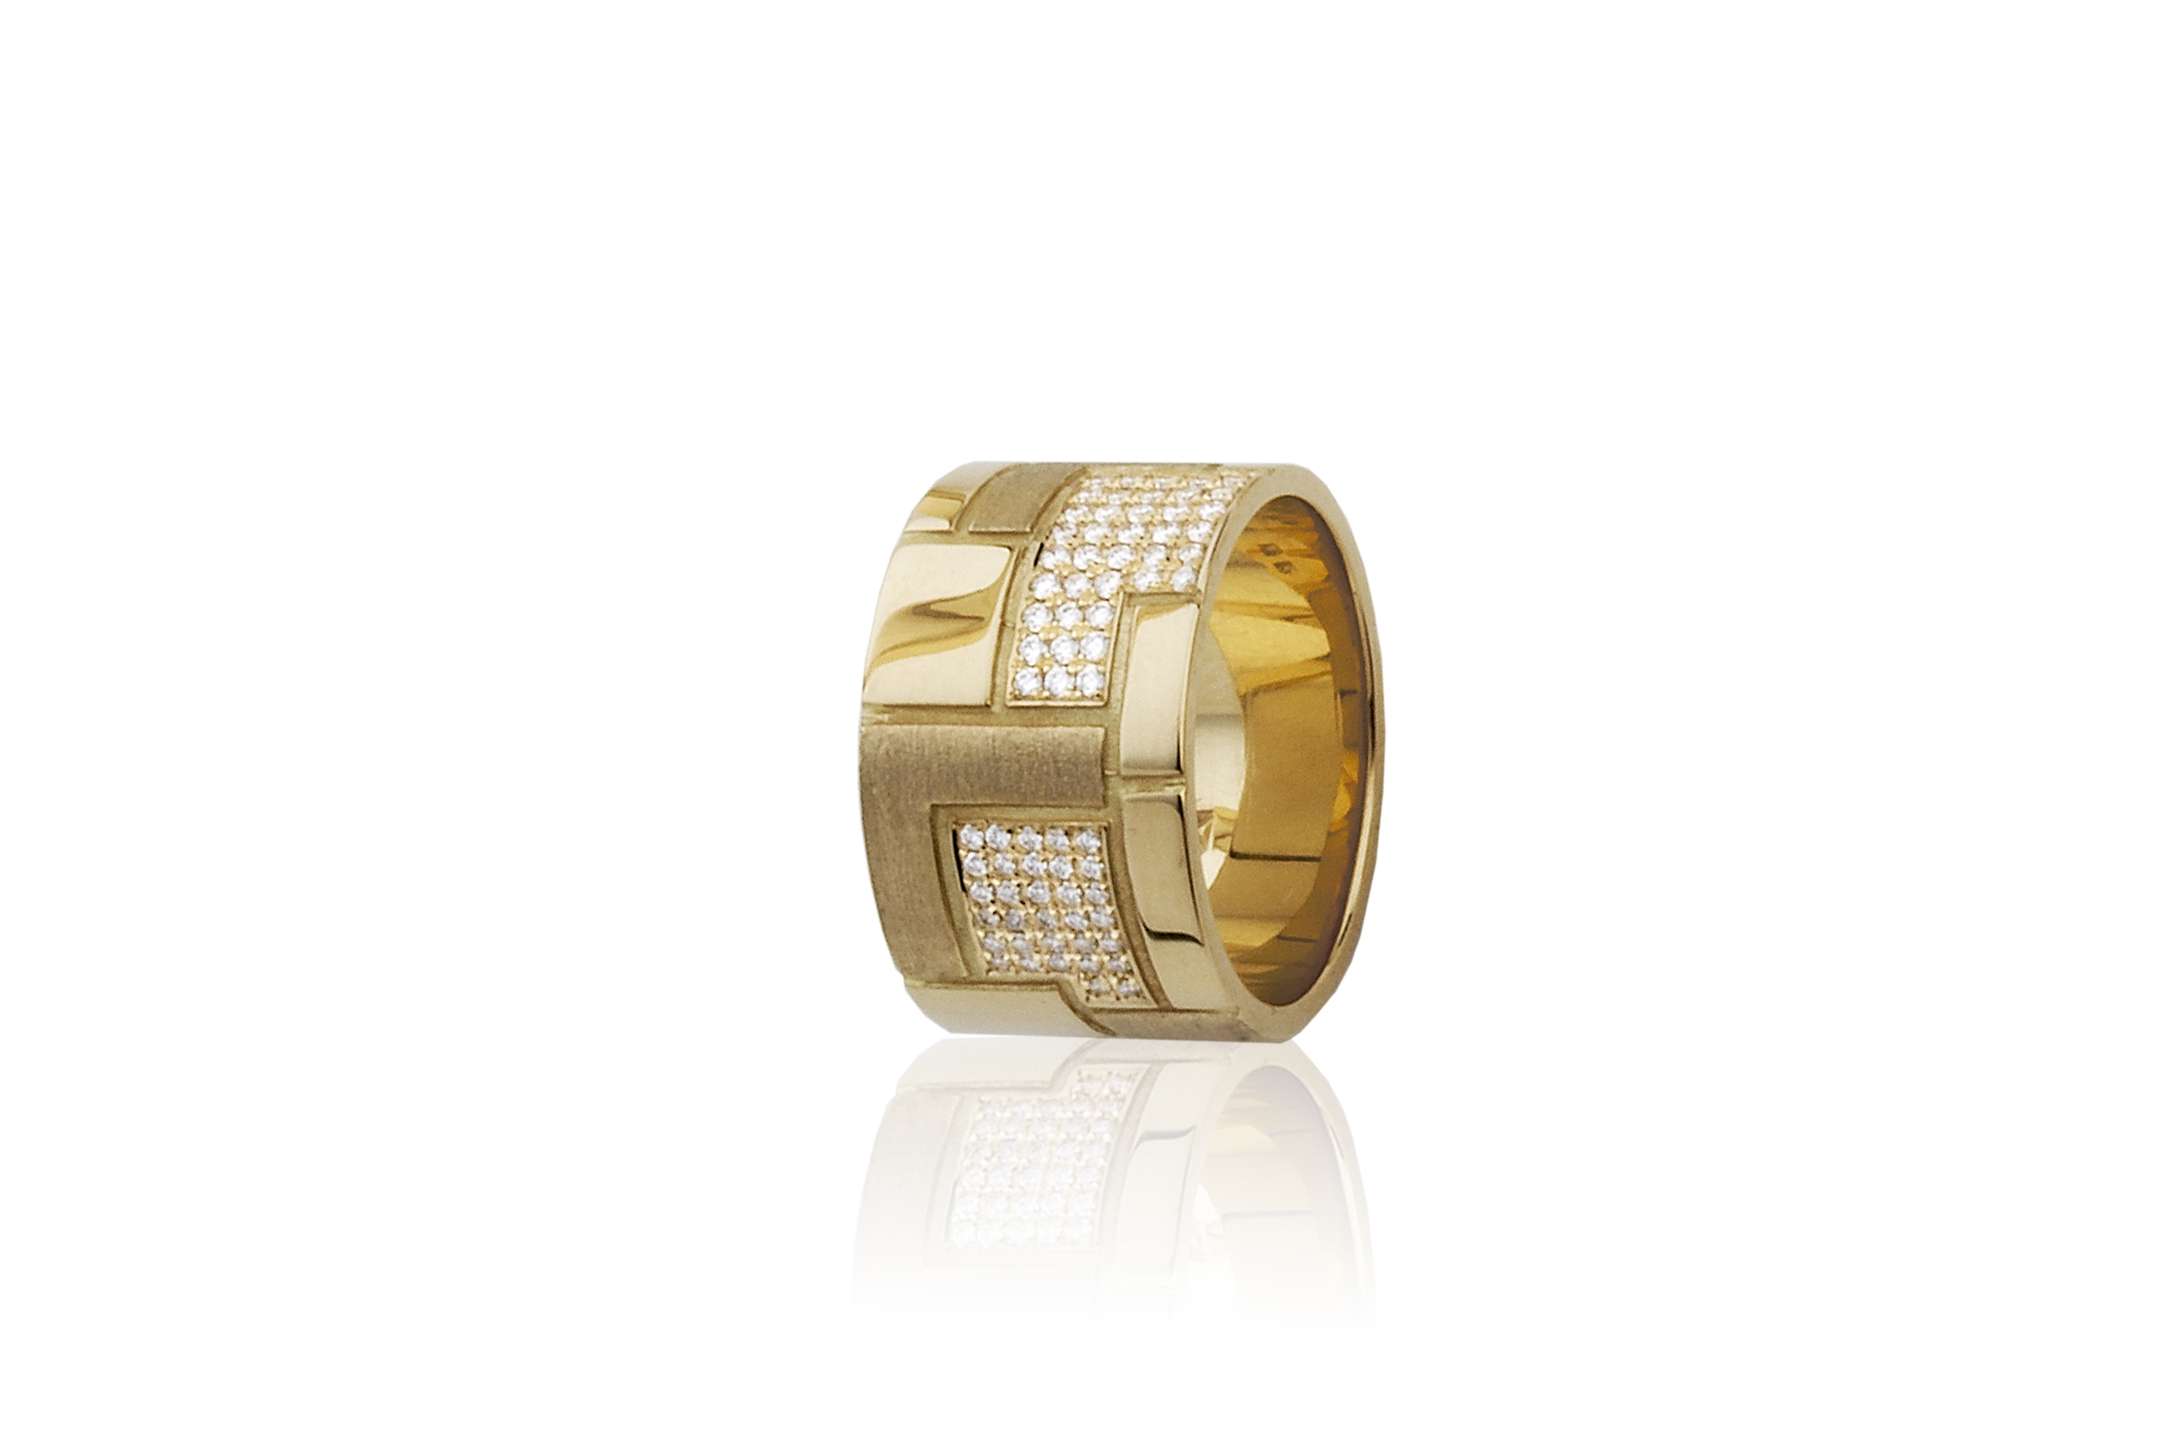 Matthia's & Claire 18k Yellow Gold Mixed Link Ring